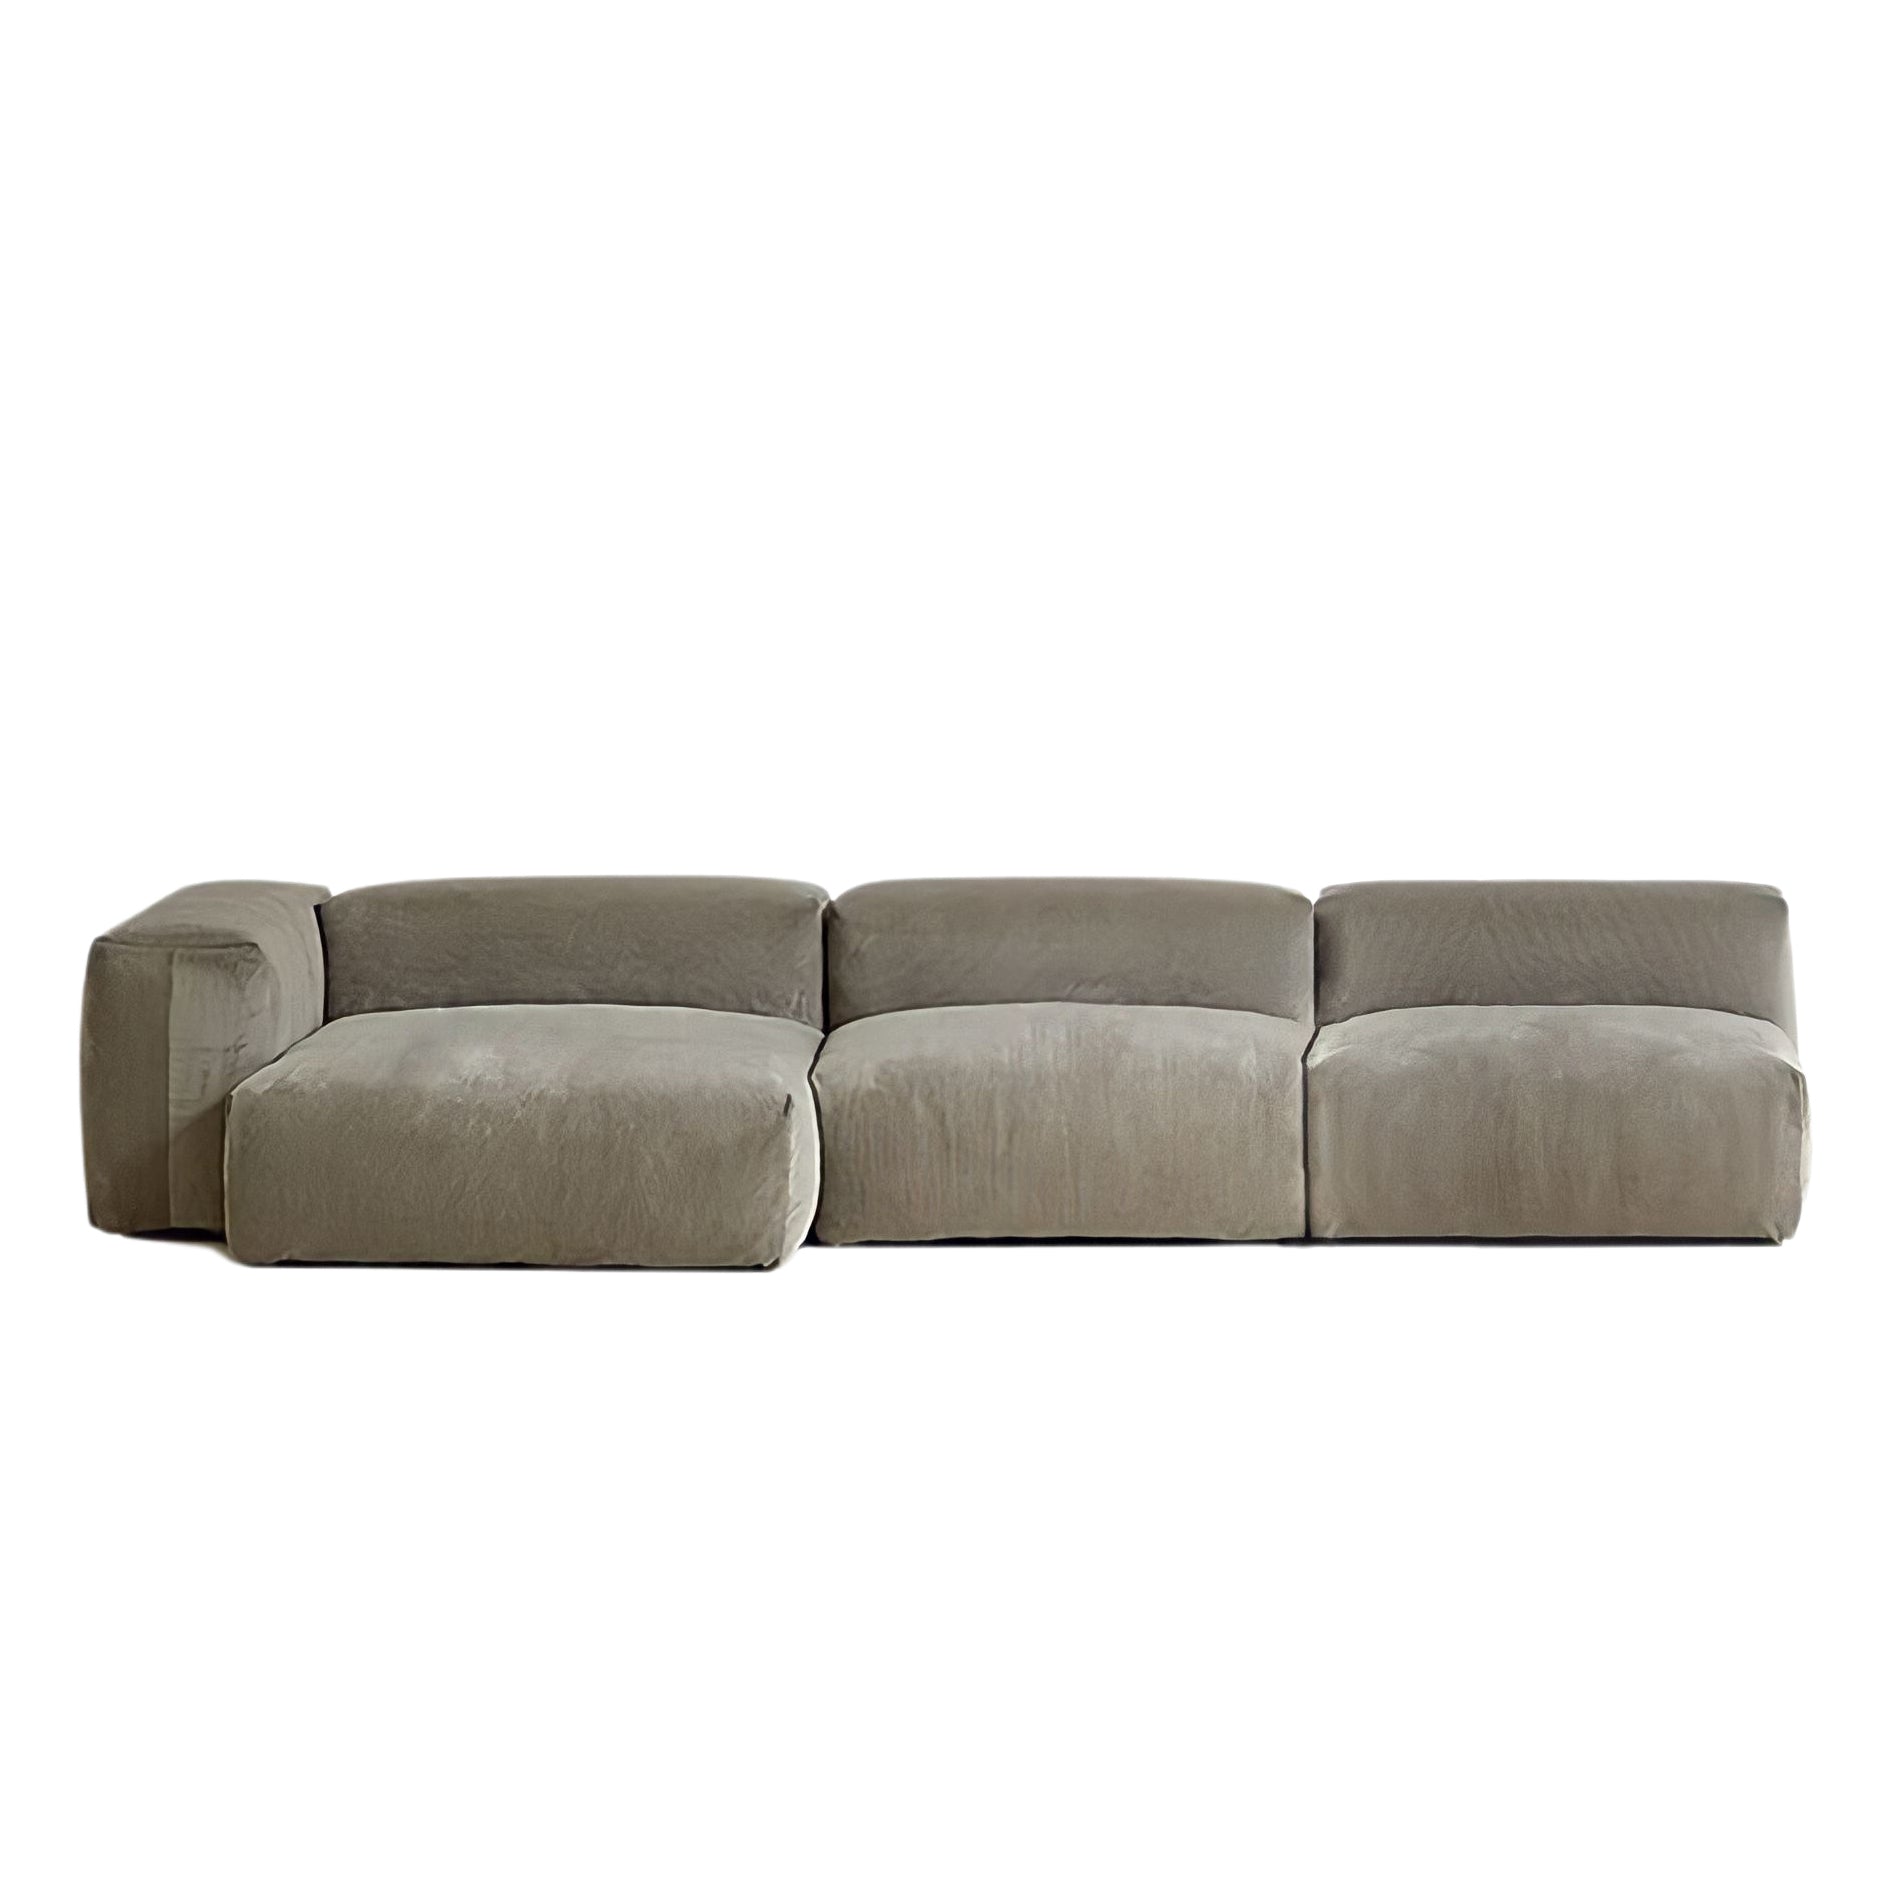 The Squish Sectional